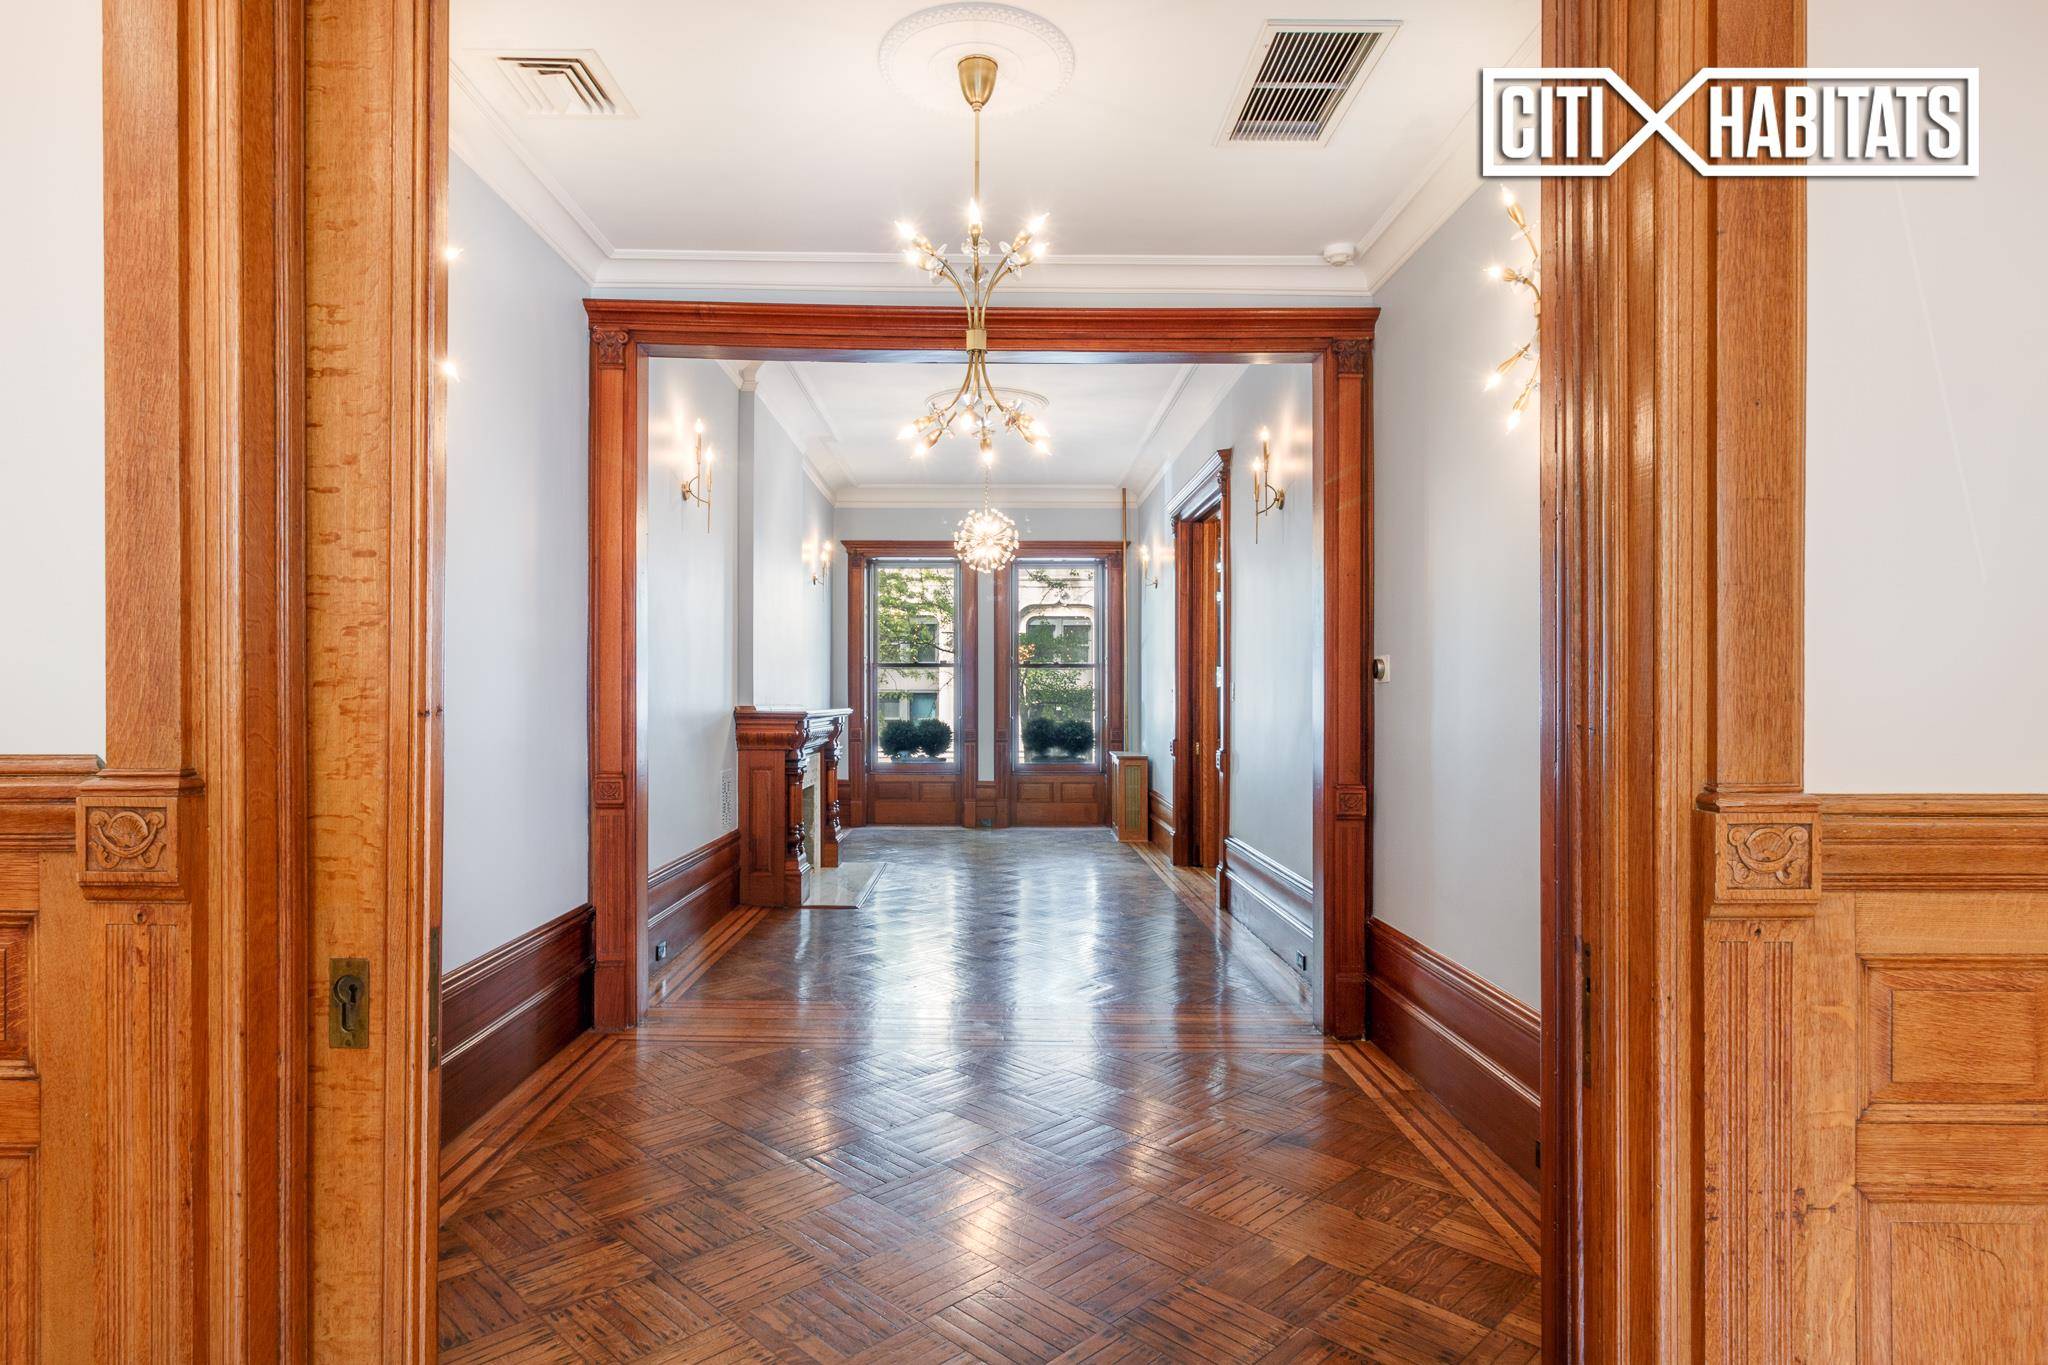 This awe inspiring Victorian treasure offers four stories and 6 bedrooms and 3 bathrooms on a peaceful tree lined street littered with equally beautiful early 20th century townhomes.